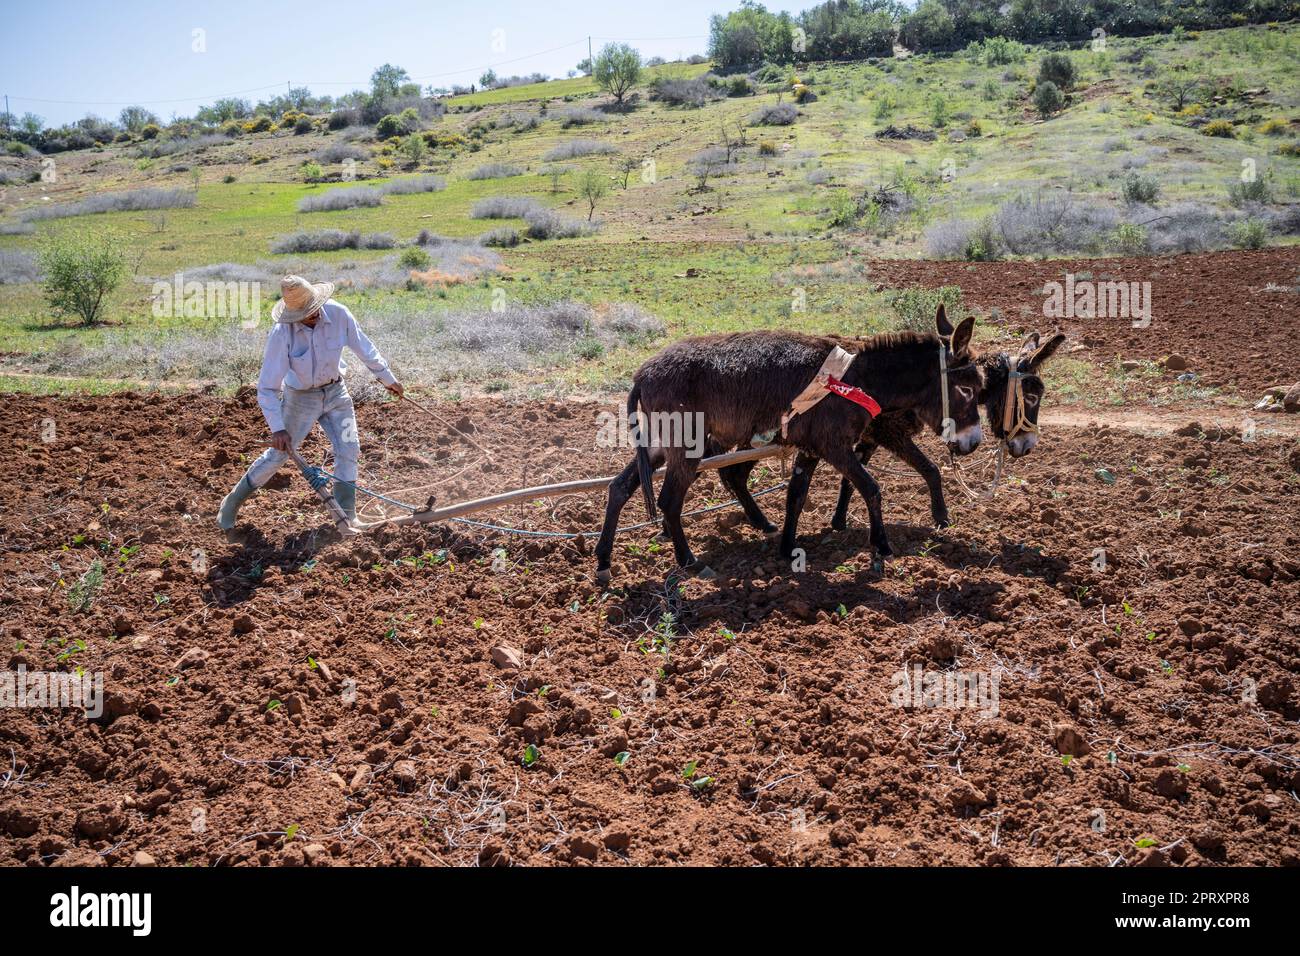 Farmer in a straw hat tilling the field with a manual plow pulled by a pair of donkeys. Stock Photo